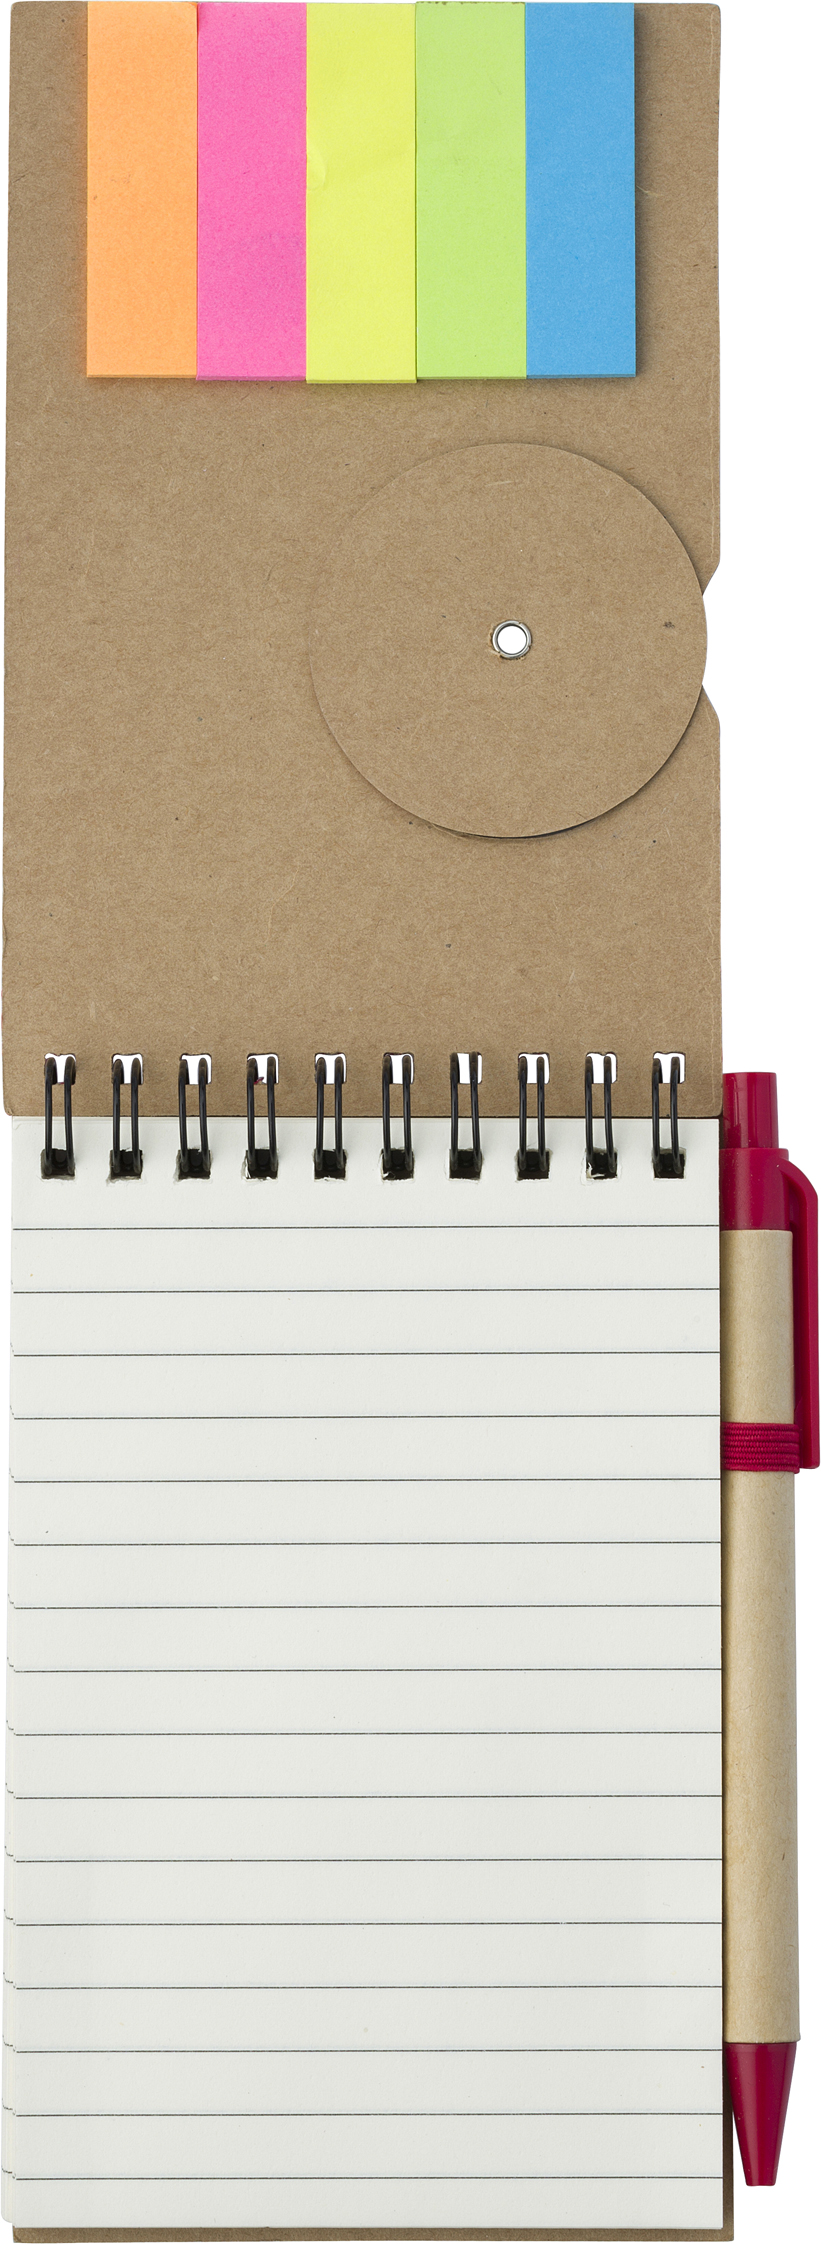 Promotional Wire bound notebook.